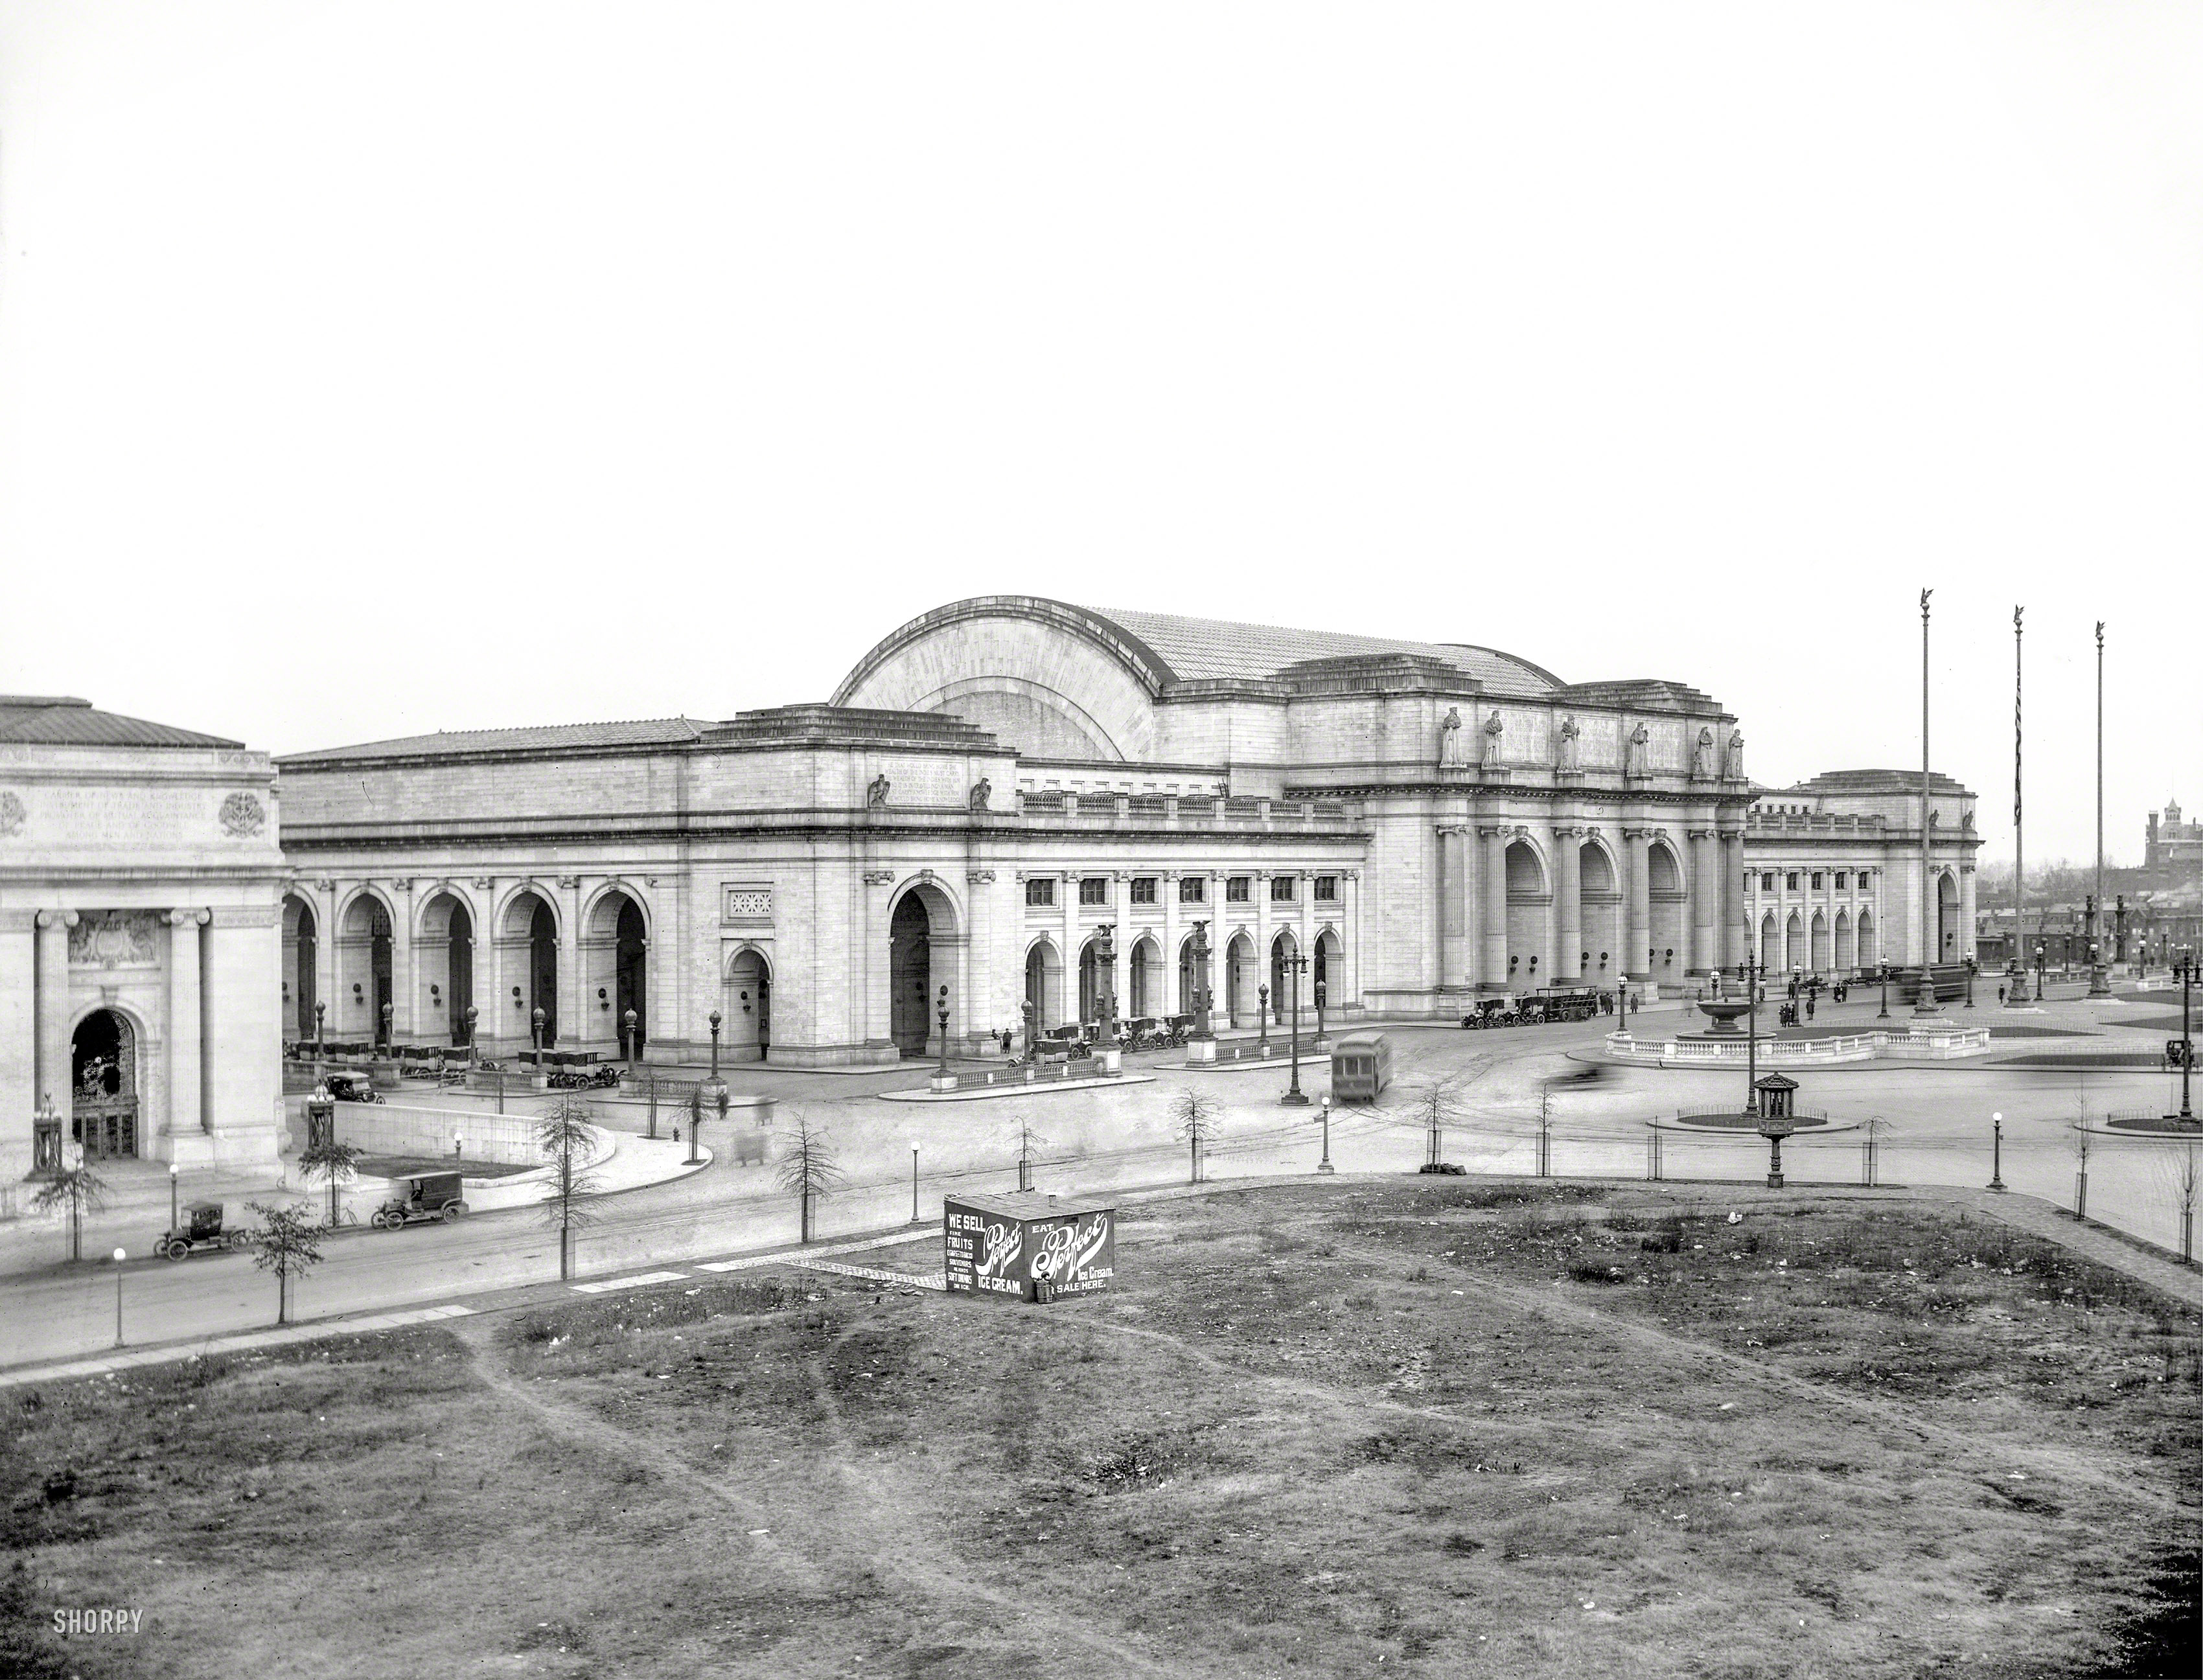 Union Station in Washington, D.C., circa 1914. Points of interest include the ice cream shack and trolley switch tower. National Photo Co. View full size.